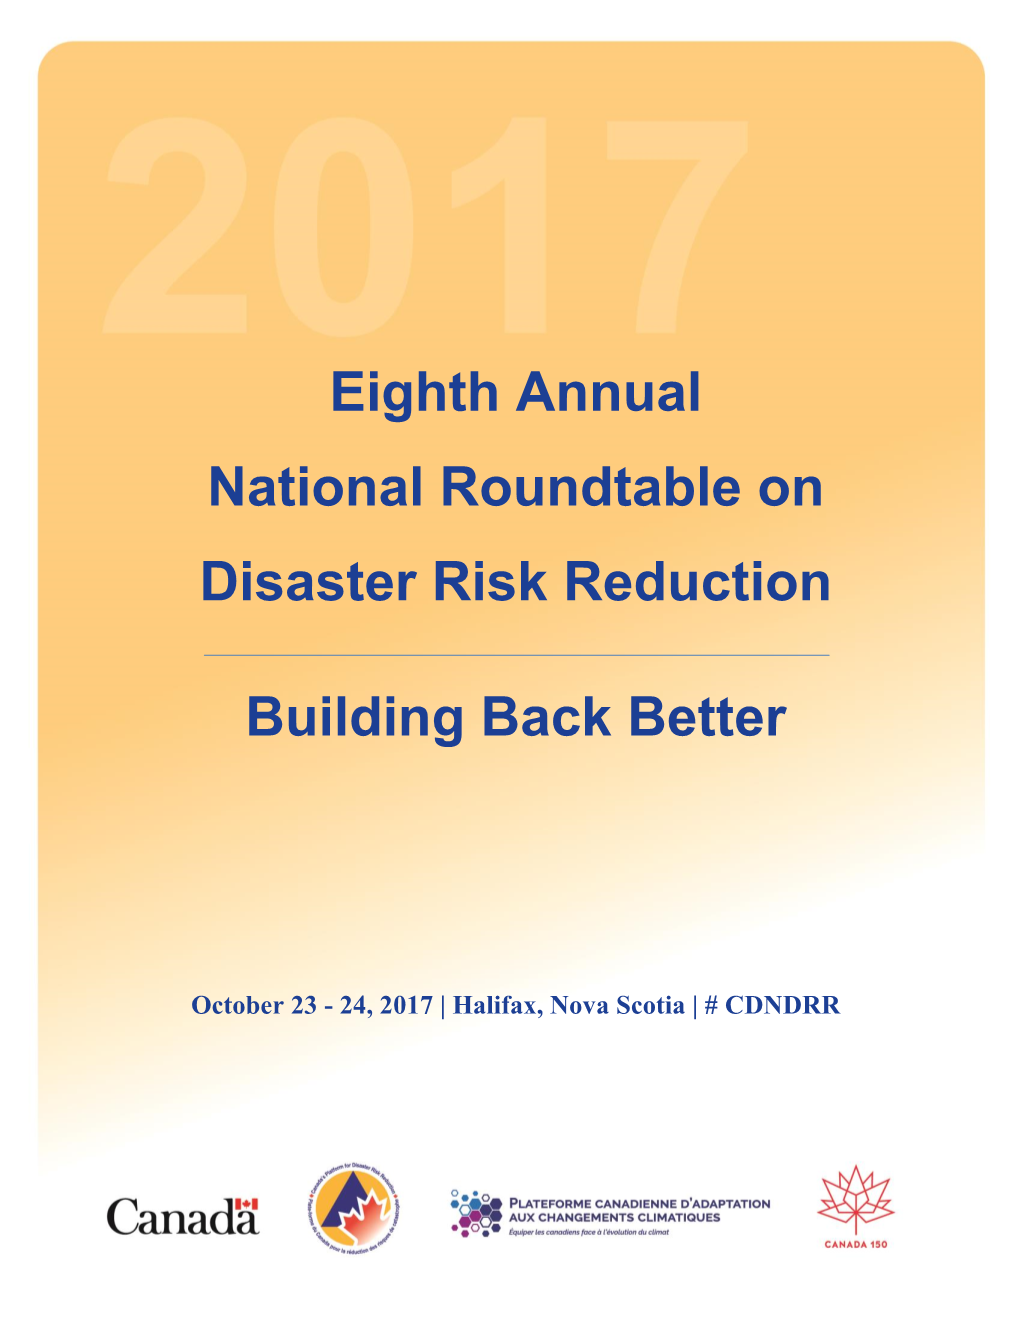 Eighth Annual National Roundtable on Disaster Risk Reduction Building Back Better